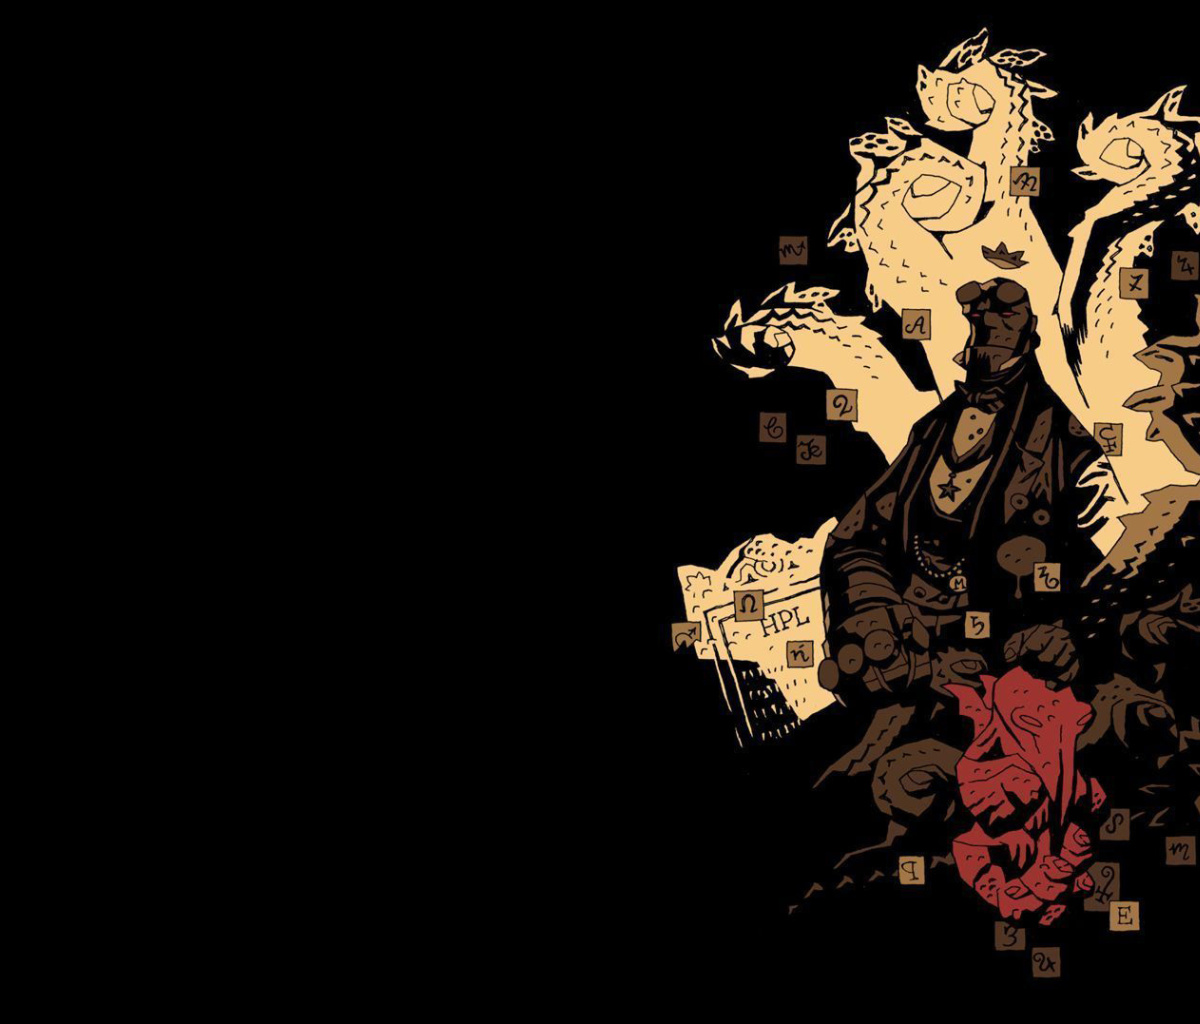 Hellboy The First 20 Years wallpaper 1200x1024